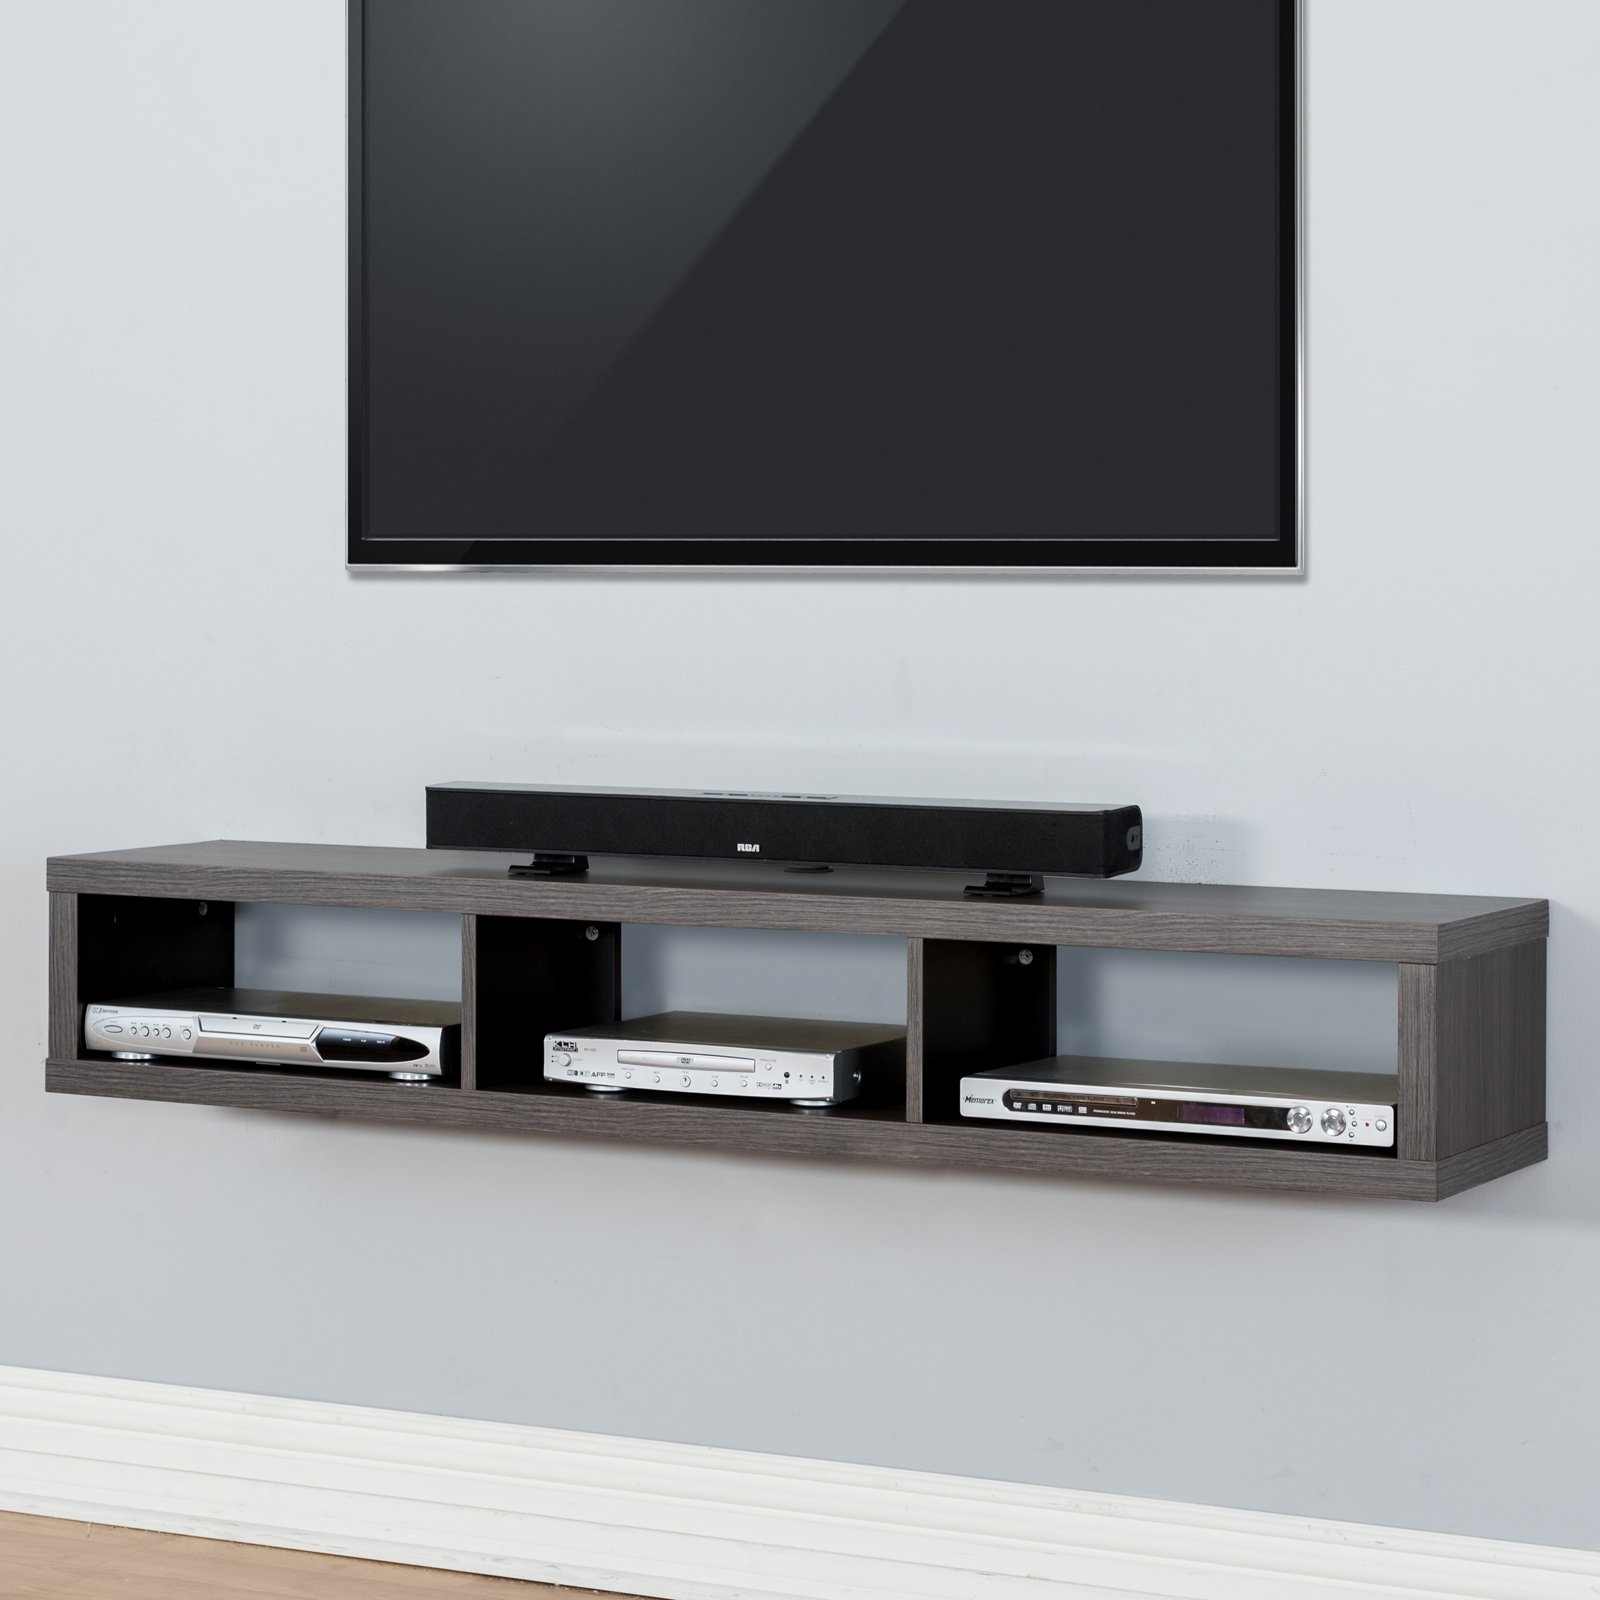 Tv Above Fireplace where to Put Cable Box Elegant Martin Furniture Shallow Wall Mounted Tv Shelf